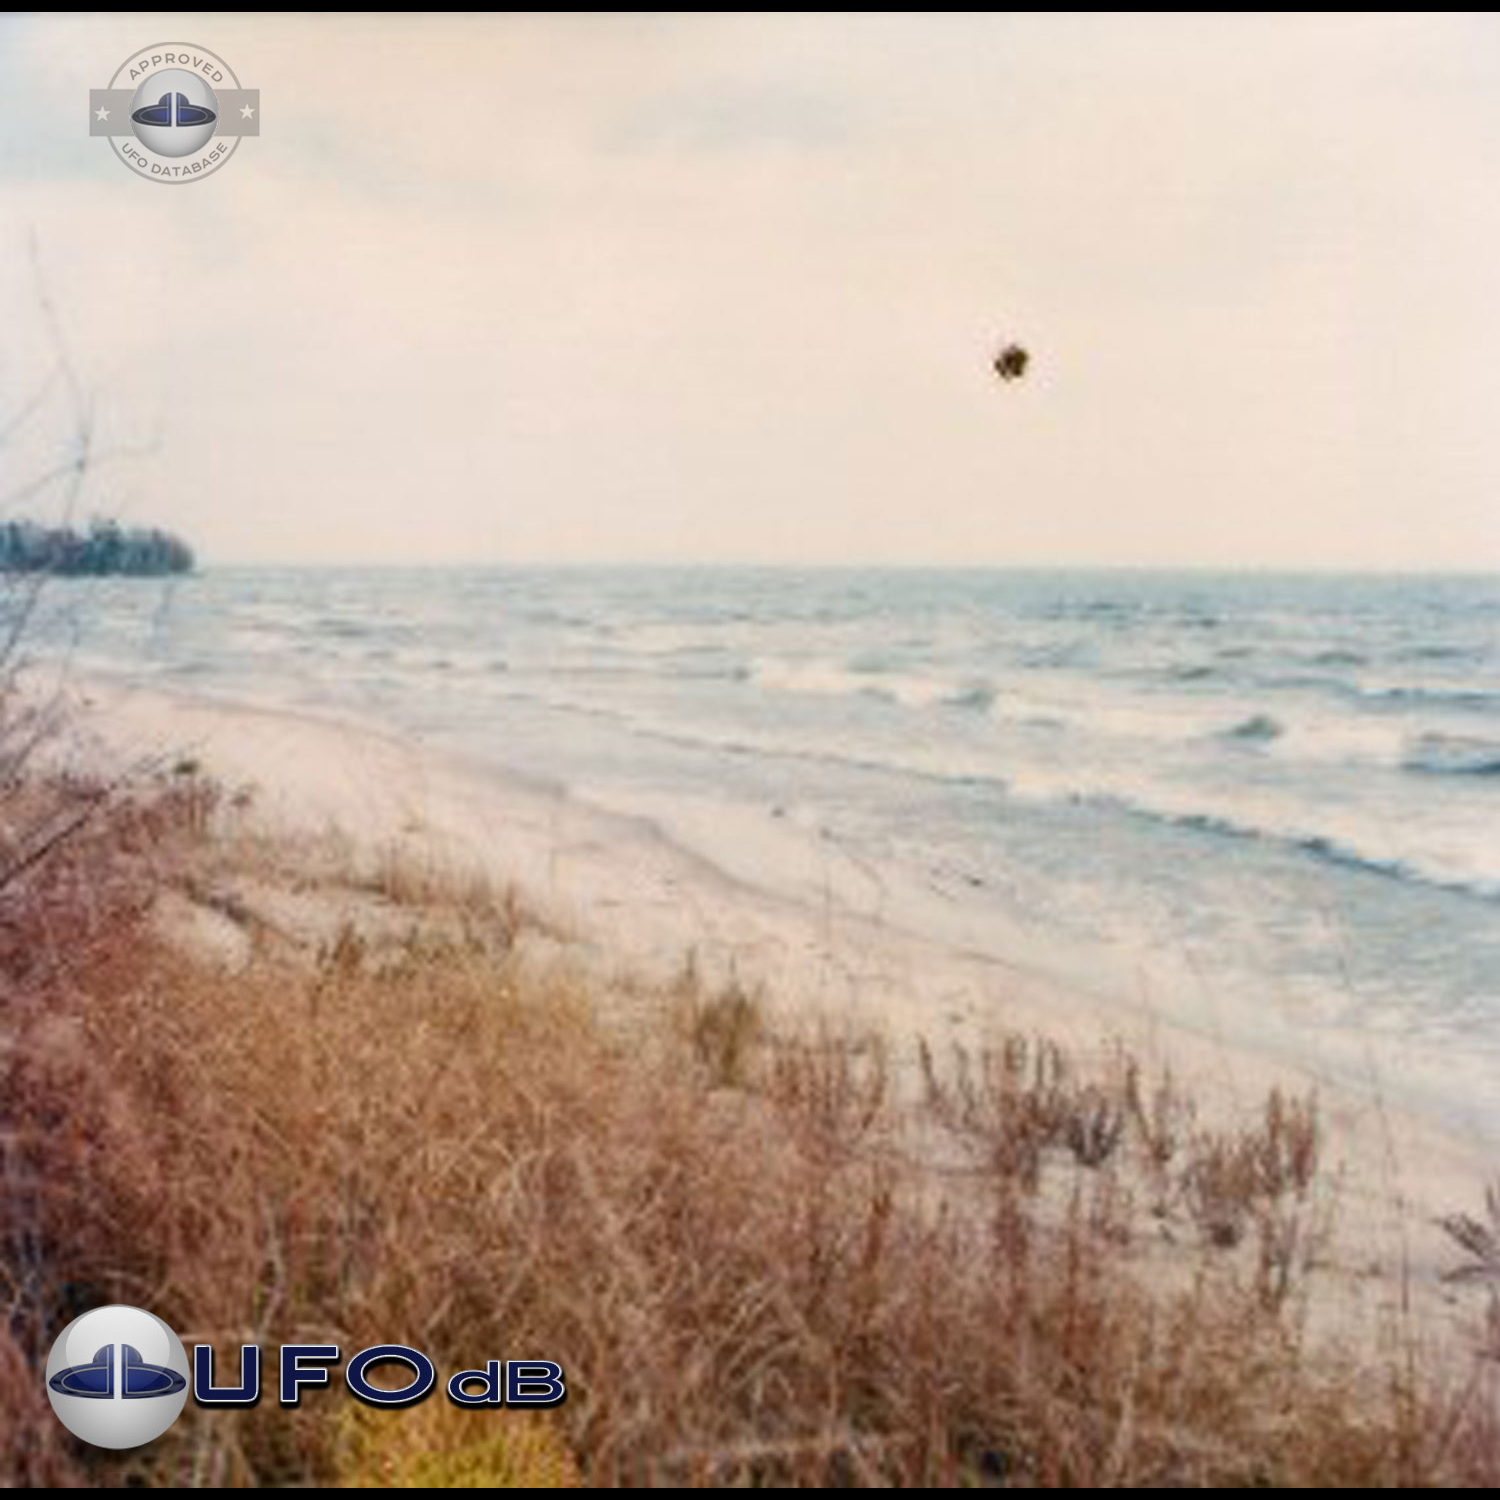 UFO Picture - UFO Sighting over Great Lake Michigan - October 1979 UFO Picture #91-1